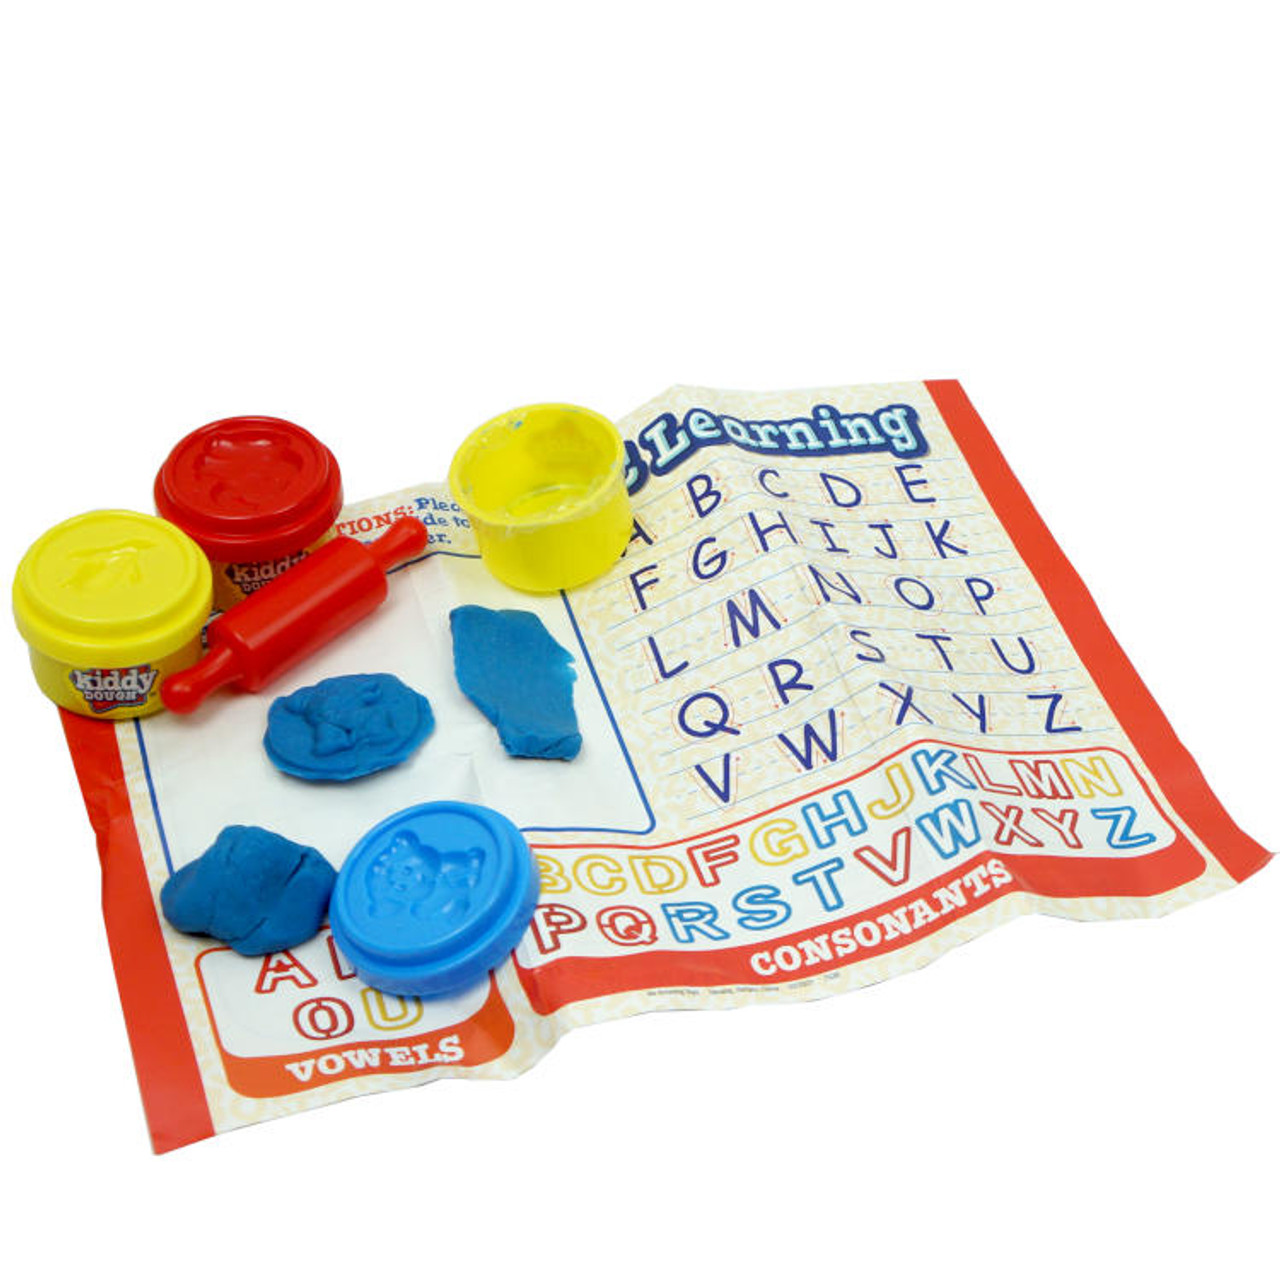 KIDDY-DOUGH EARLY LEARNING CLAY MOLDING KIT